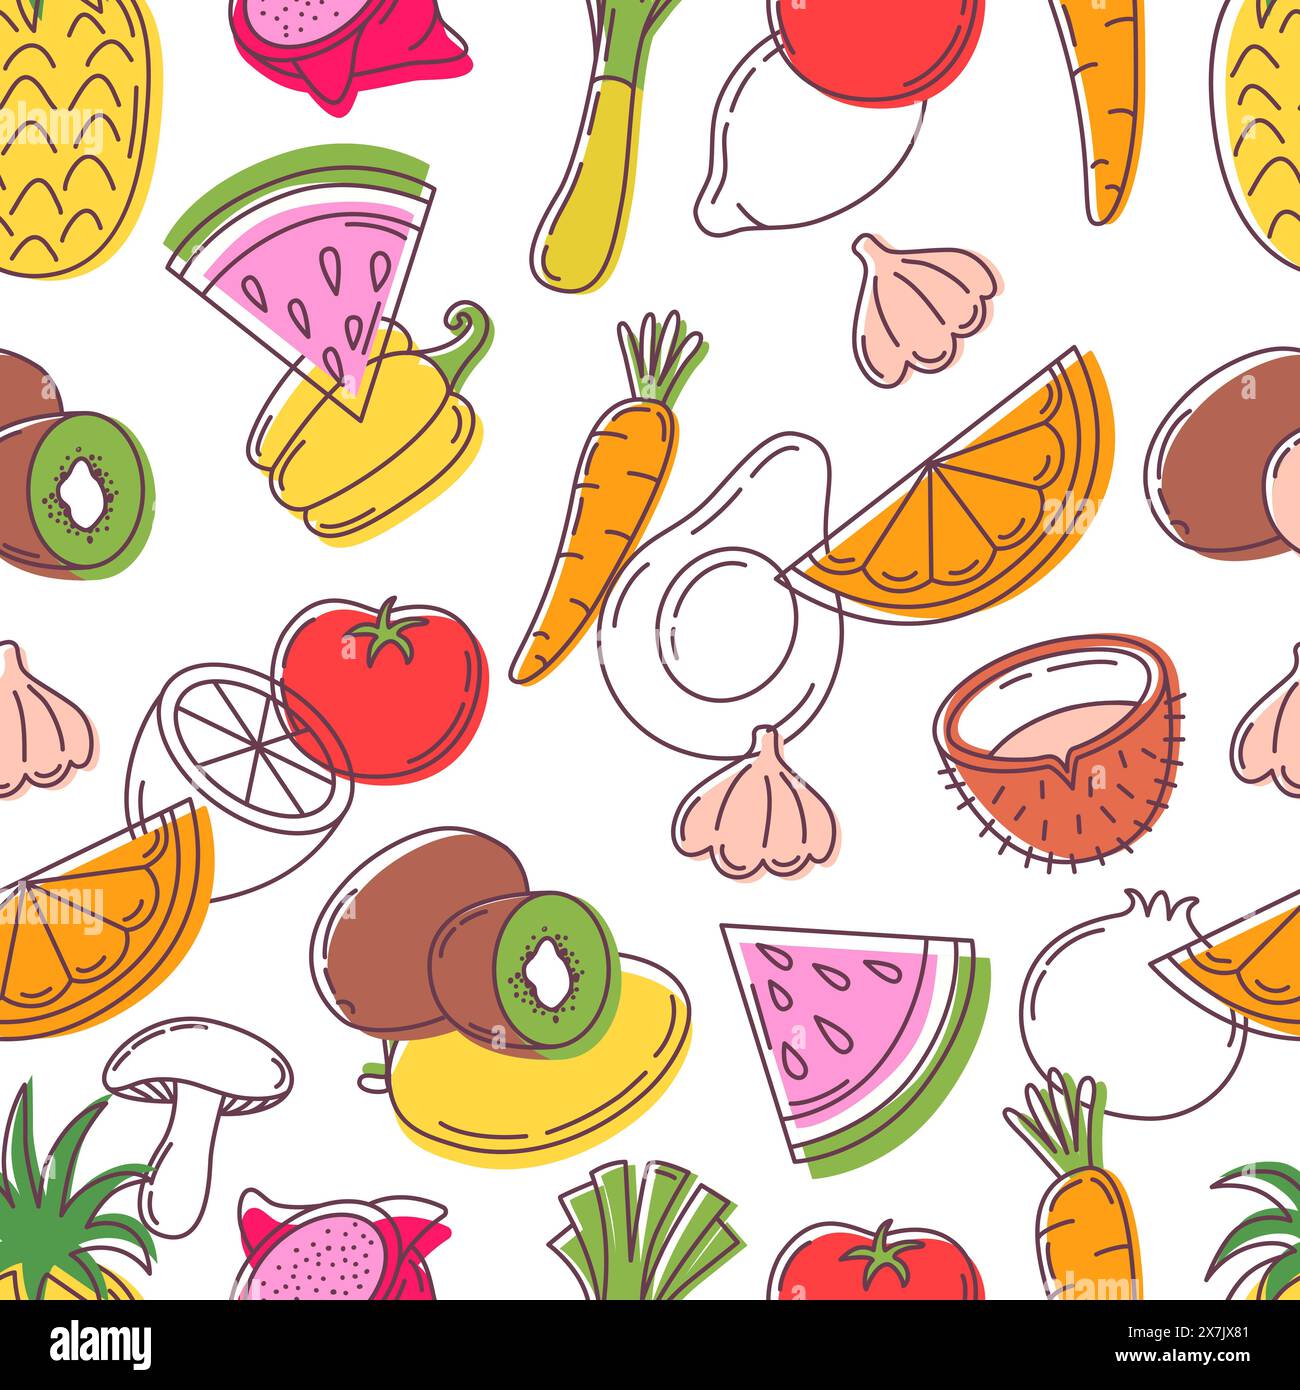 Doodle vegan seamless pattern. Fruits and vegetables, hand drawn style fresh food. Kitchen fabric print design, neoteric vector background Stock Vector